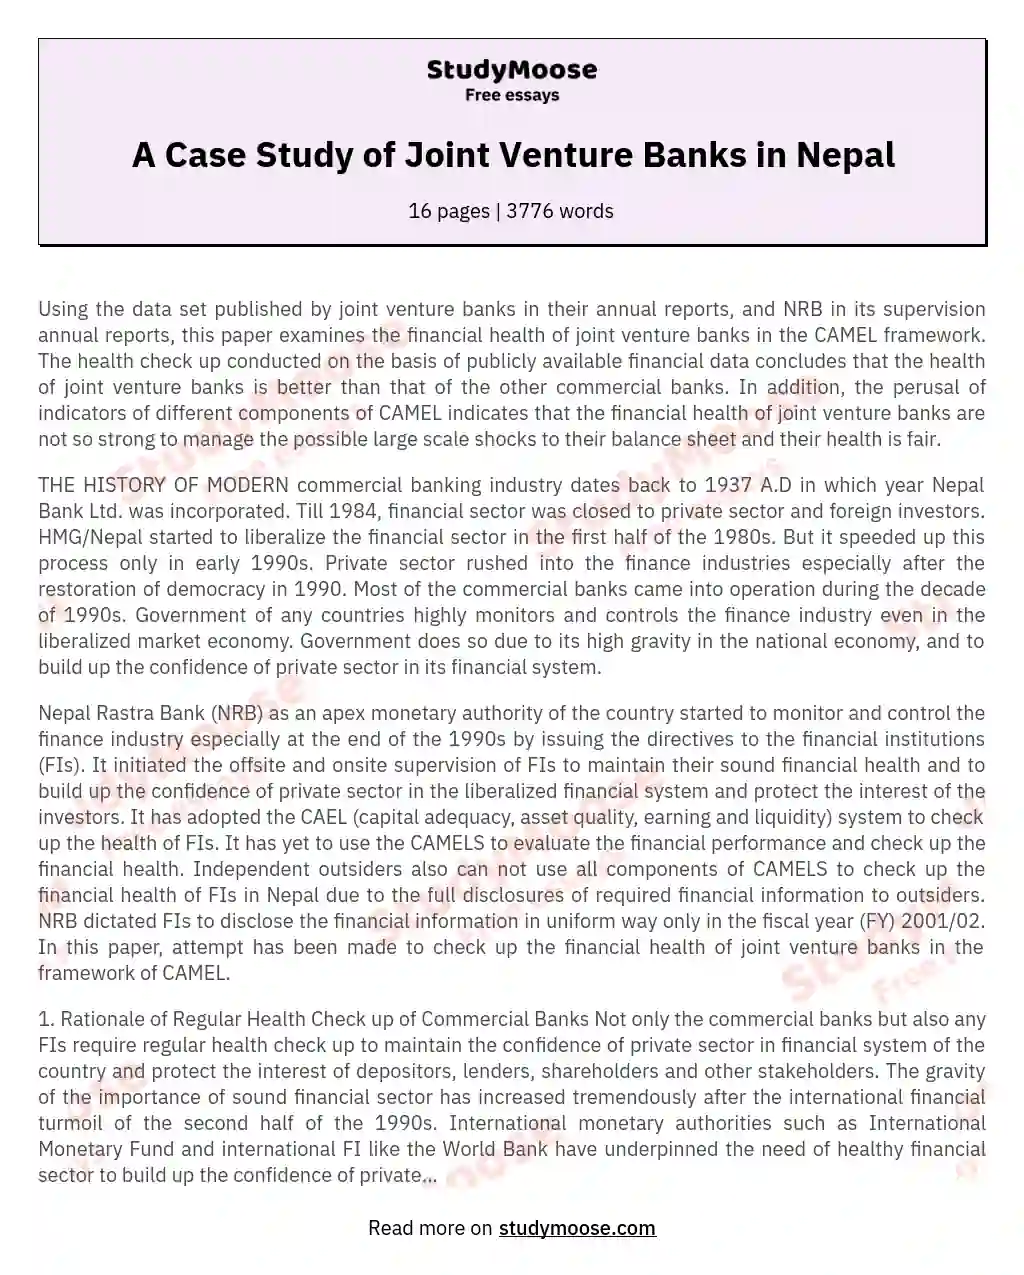 A Case Study of Joint Venture Banks in Nepal essay